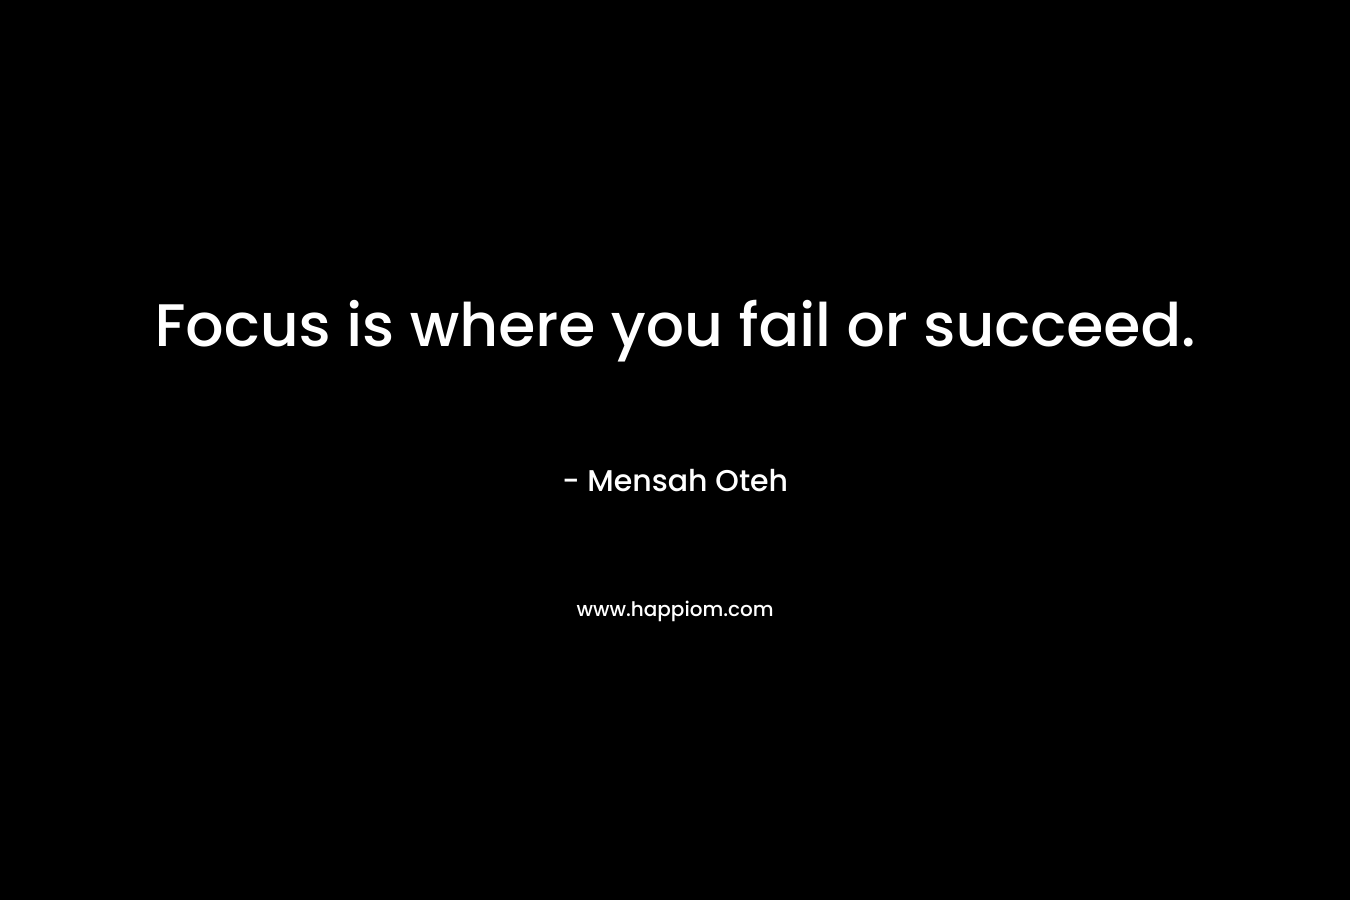 Focus is where you fail or succeed.